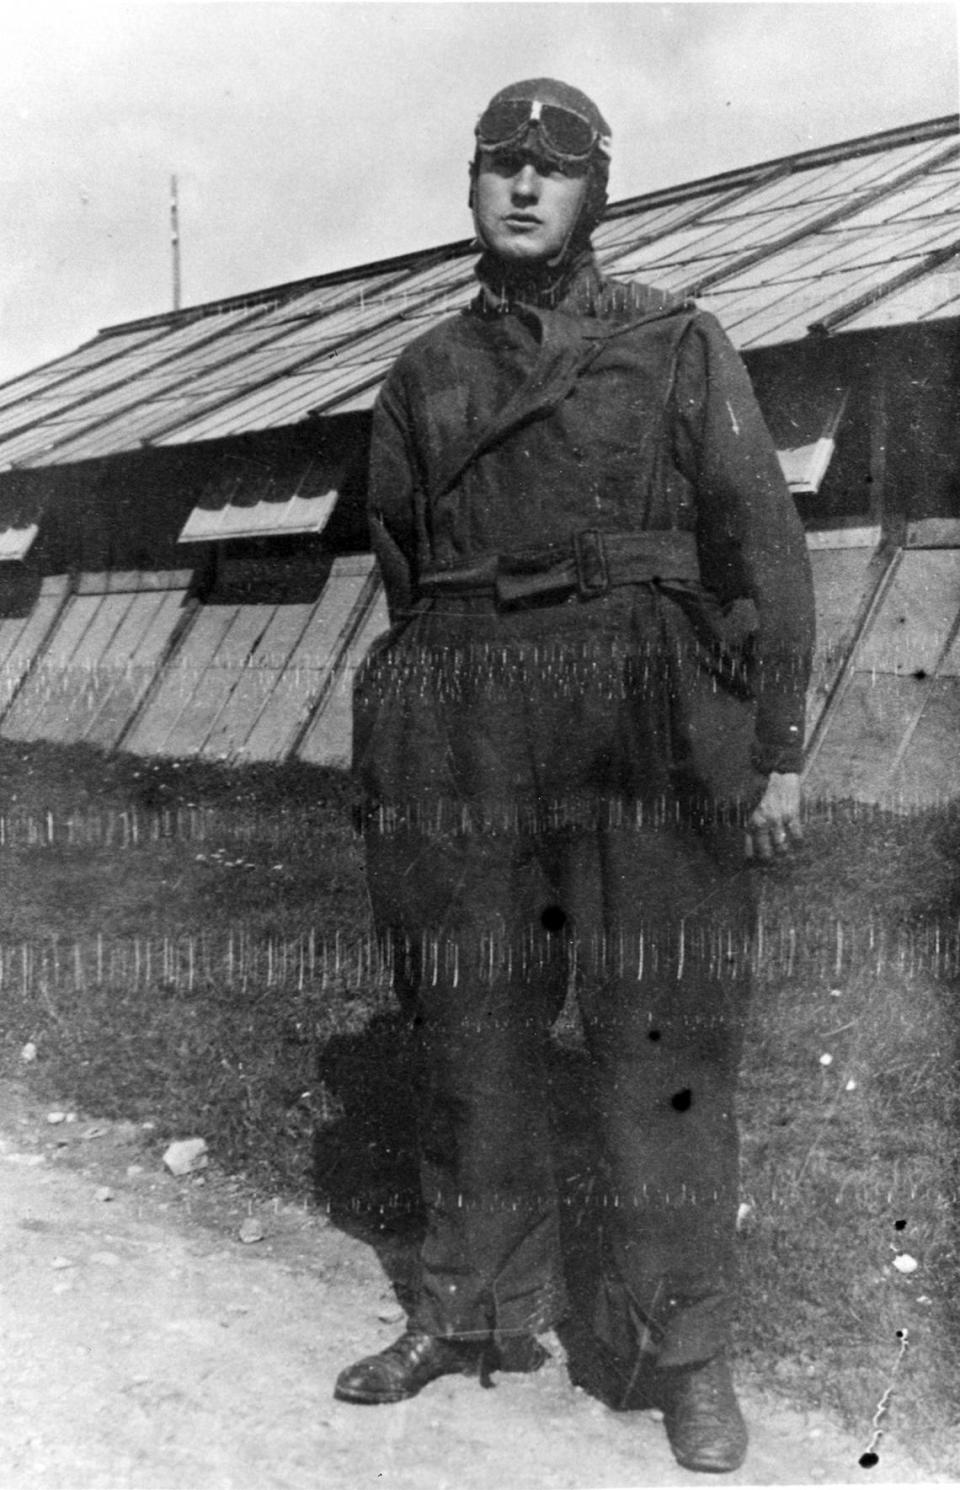 Erwin Bleckley pictured in his aviation observer uniform in France during World War I.